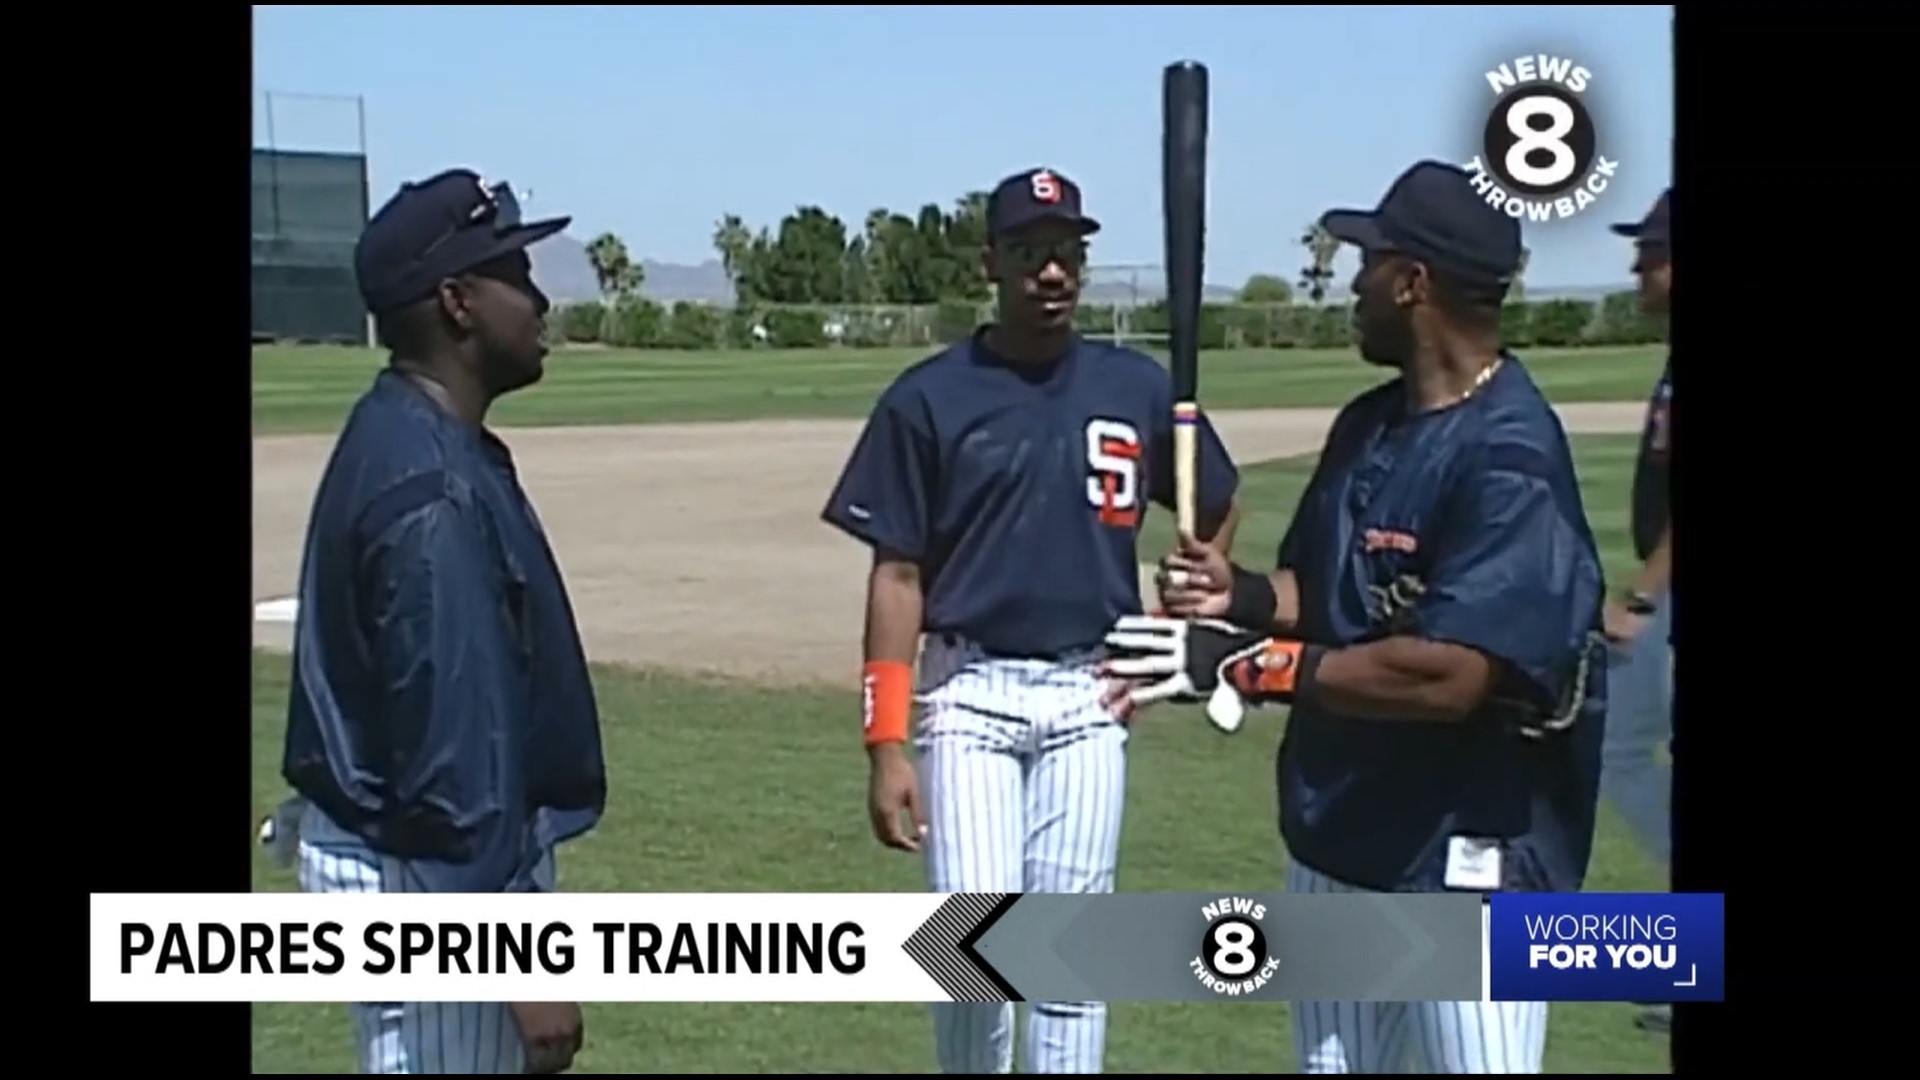 A look back at past Spring Training coverage for the San Diego Padres.